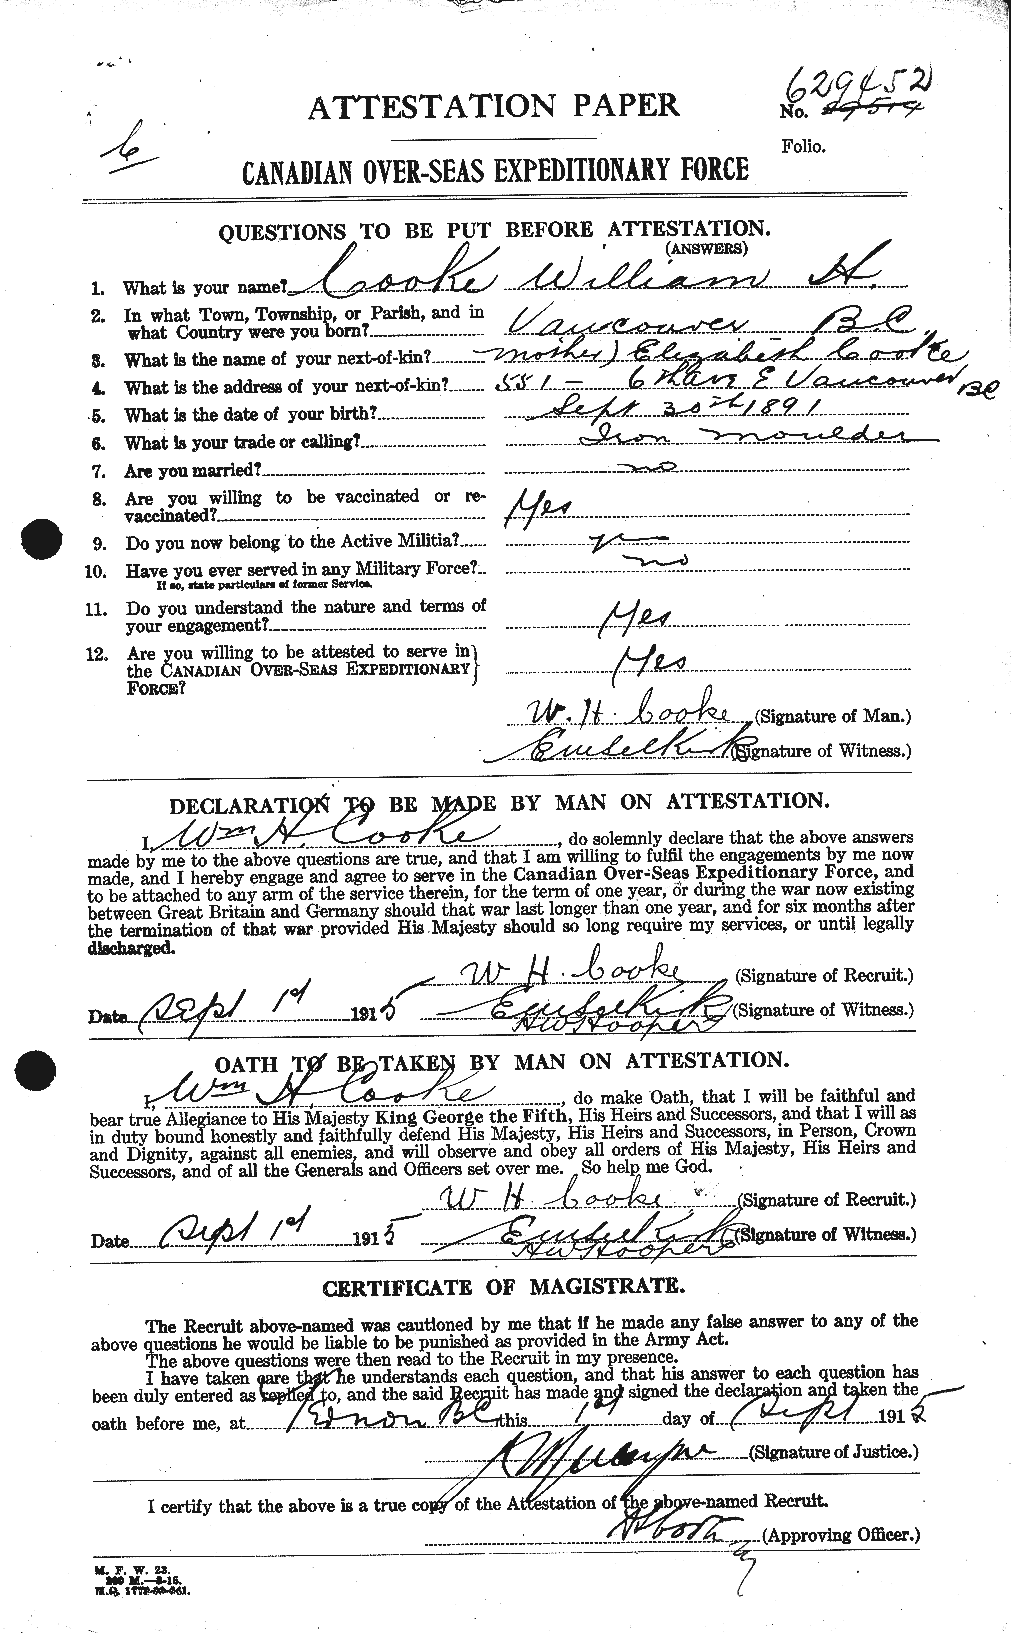 Personnel Records of the First World War - CEF 056803a